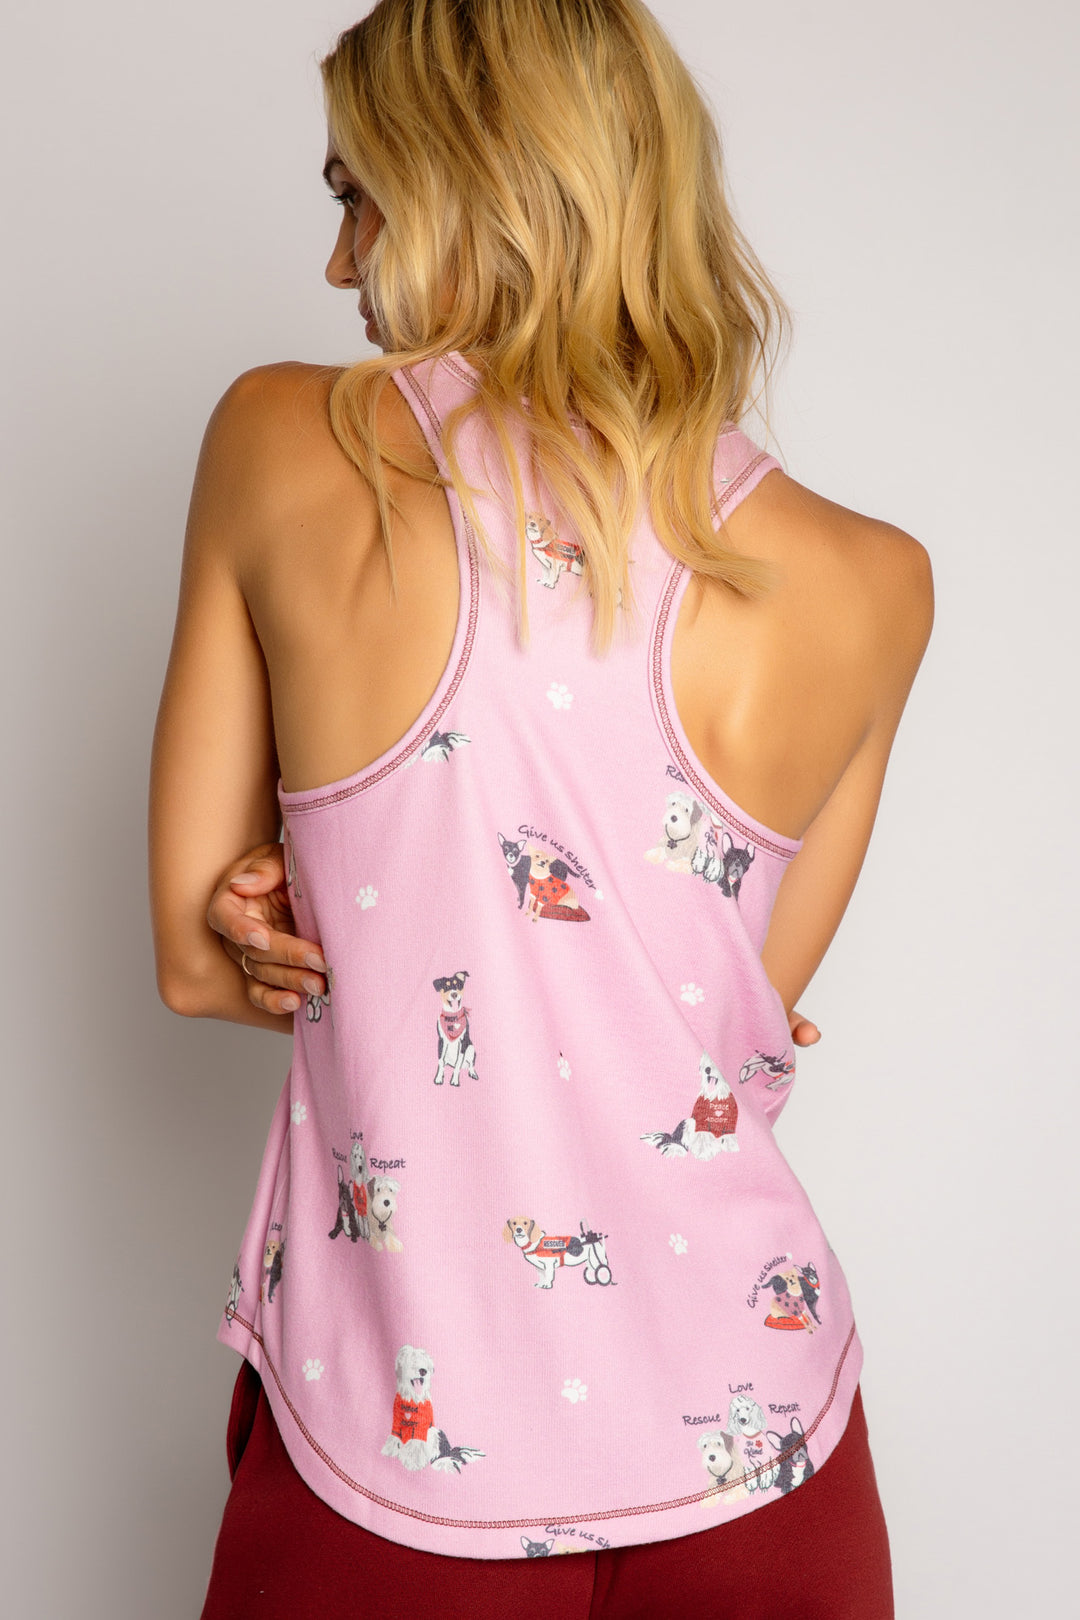 Sleep tank top in peachy knit in pink rescue-dog theme print. Racer-back with relaxed fit. (7325668802660)